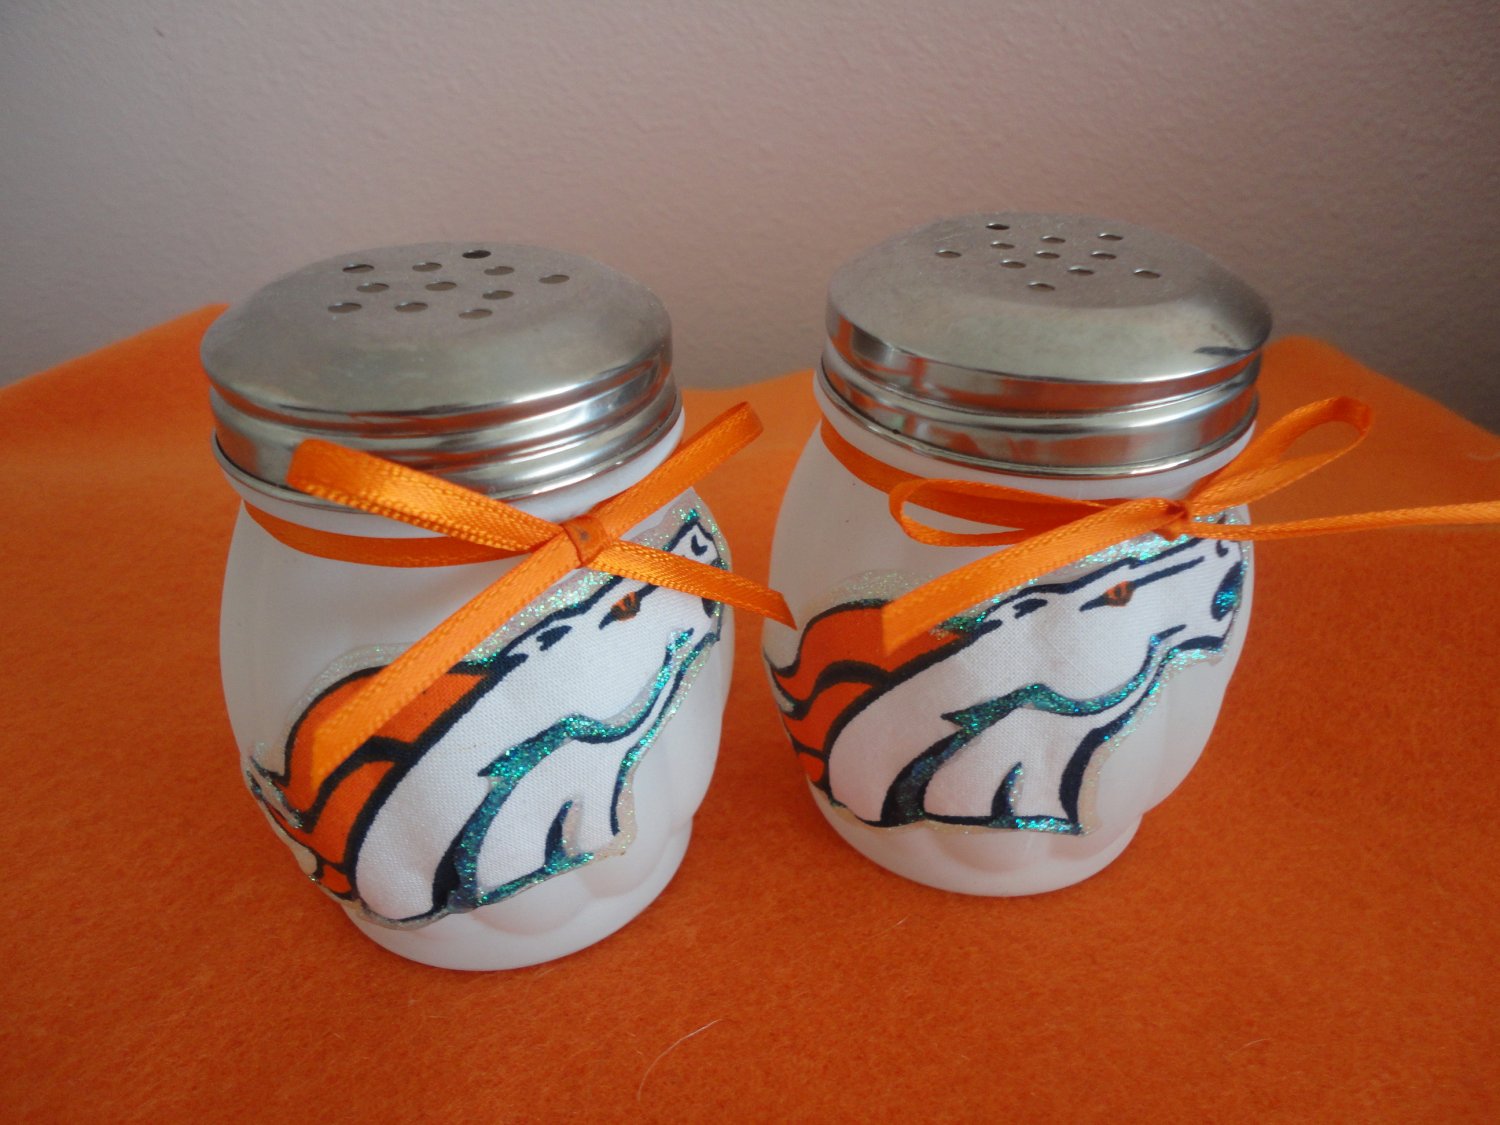 NFL Denver Broncos Pizza Shakers - Cheese & Hot Pepper Chips Shakers - NEW